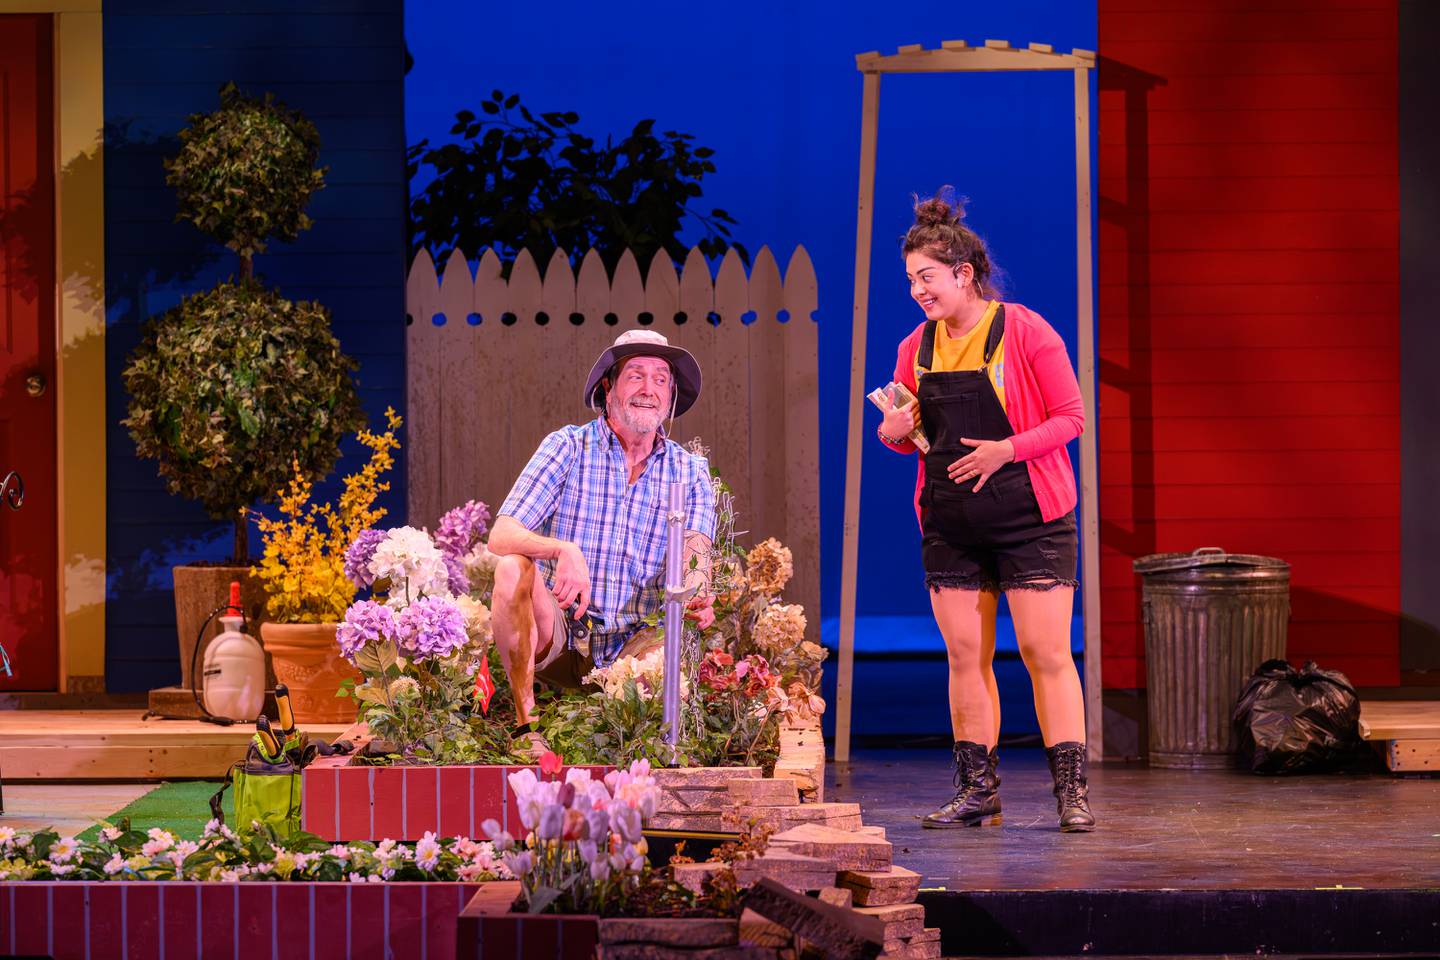 Frank and Tania. "Native Gardens" Williams Street Rep in Crystal Lake in 2024. The older well-established couple, the Butlers, are portrayed by Shannon Mayhall (Virginia) and Michael Lomenick (Frank). The new, next-door millennials, the Del Valles, are portrayed by Peter Briceno Gertas (Pablo) and Jazmine Tamayo (Tania).